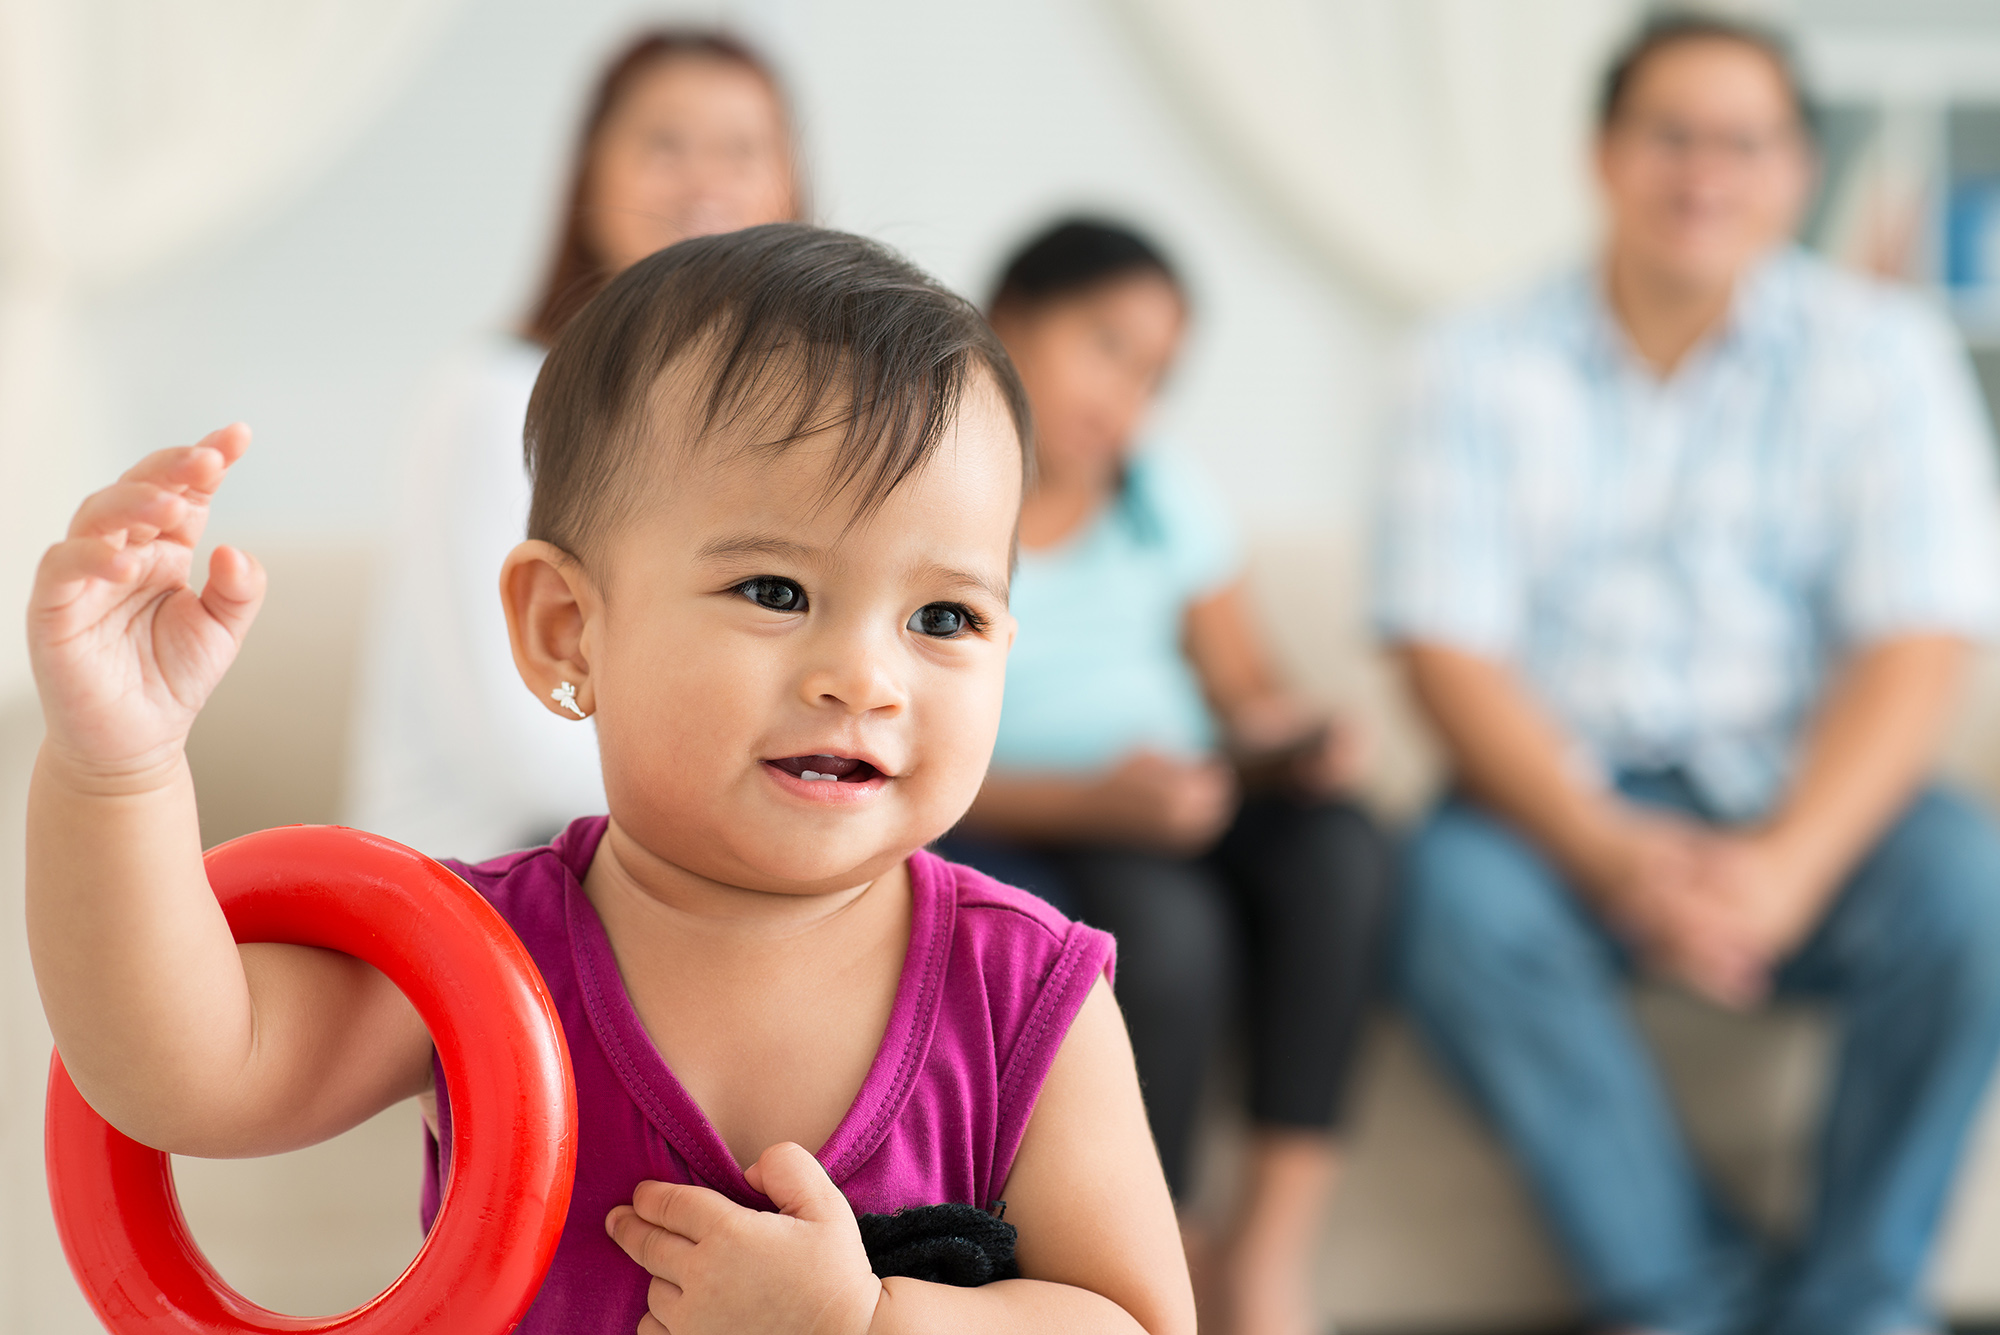 Toddler stands with a red ring toy around her arm. Her family is out of focus in the background. 